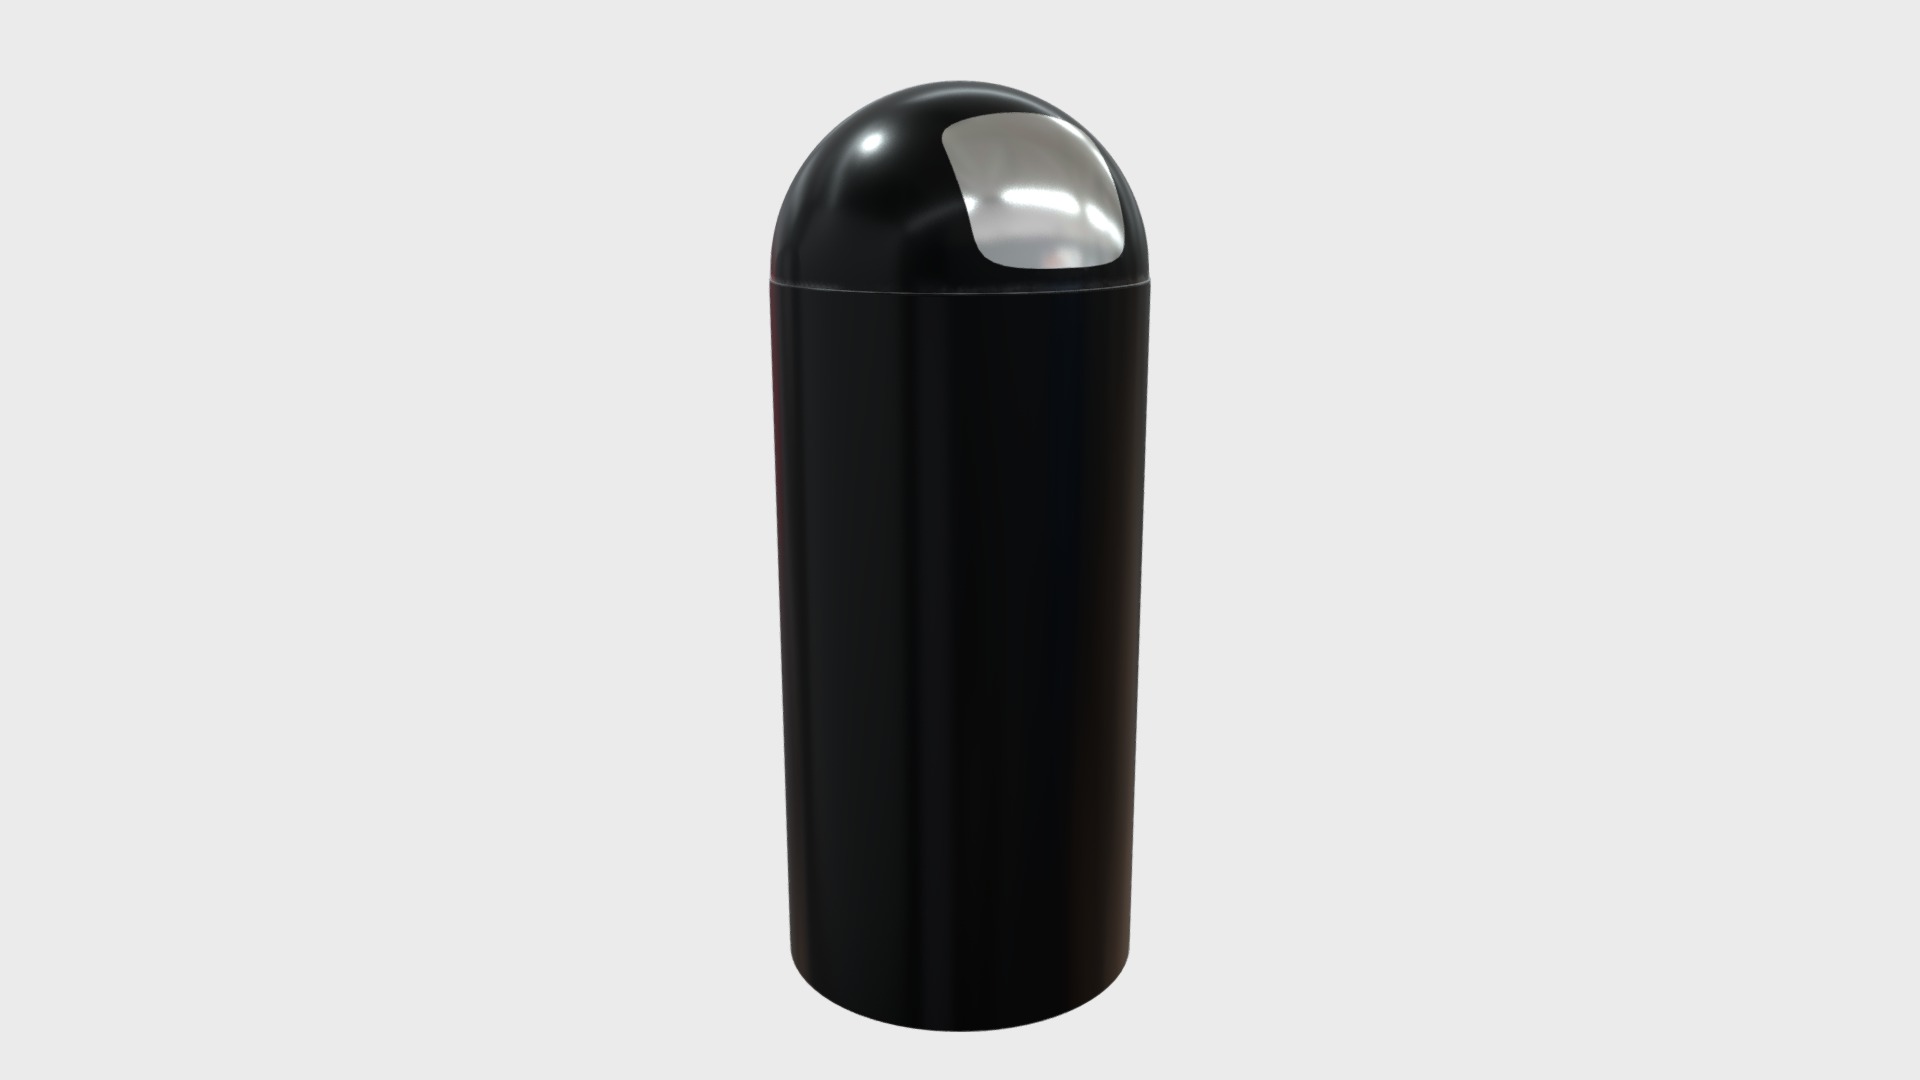 3D model Round top trash bin - This is a 3D model of the Round top trash bin. The 3D model is about a black cylindrical object.